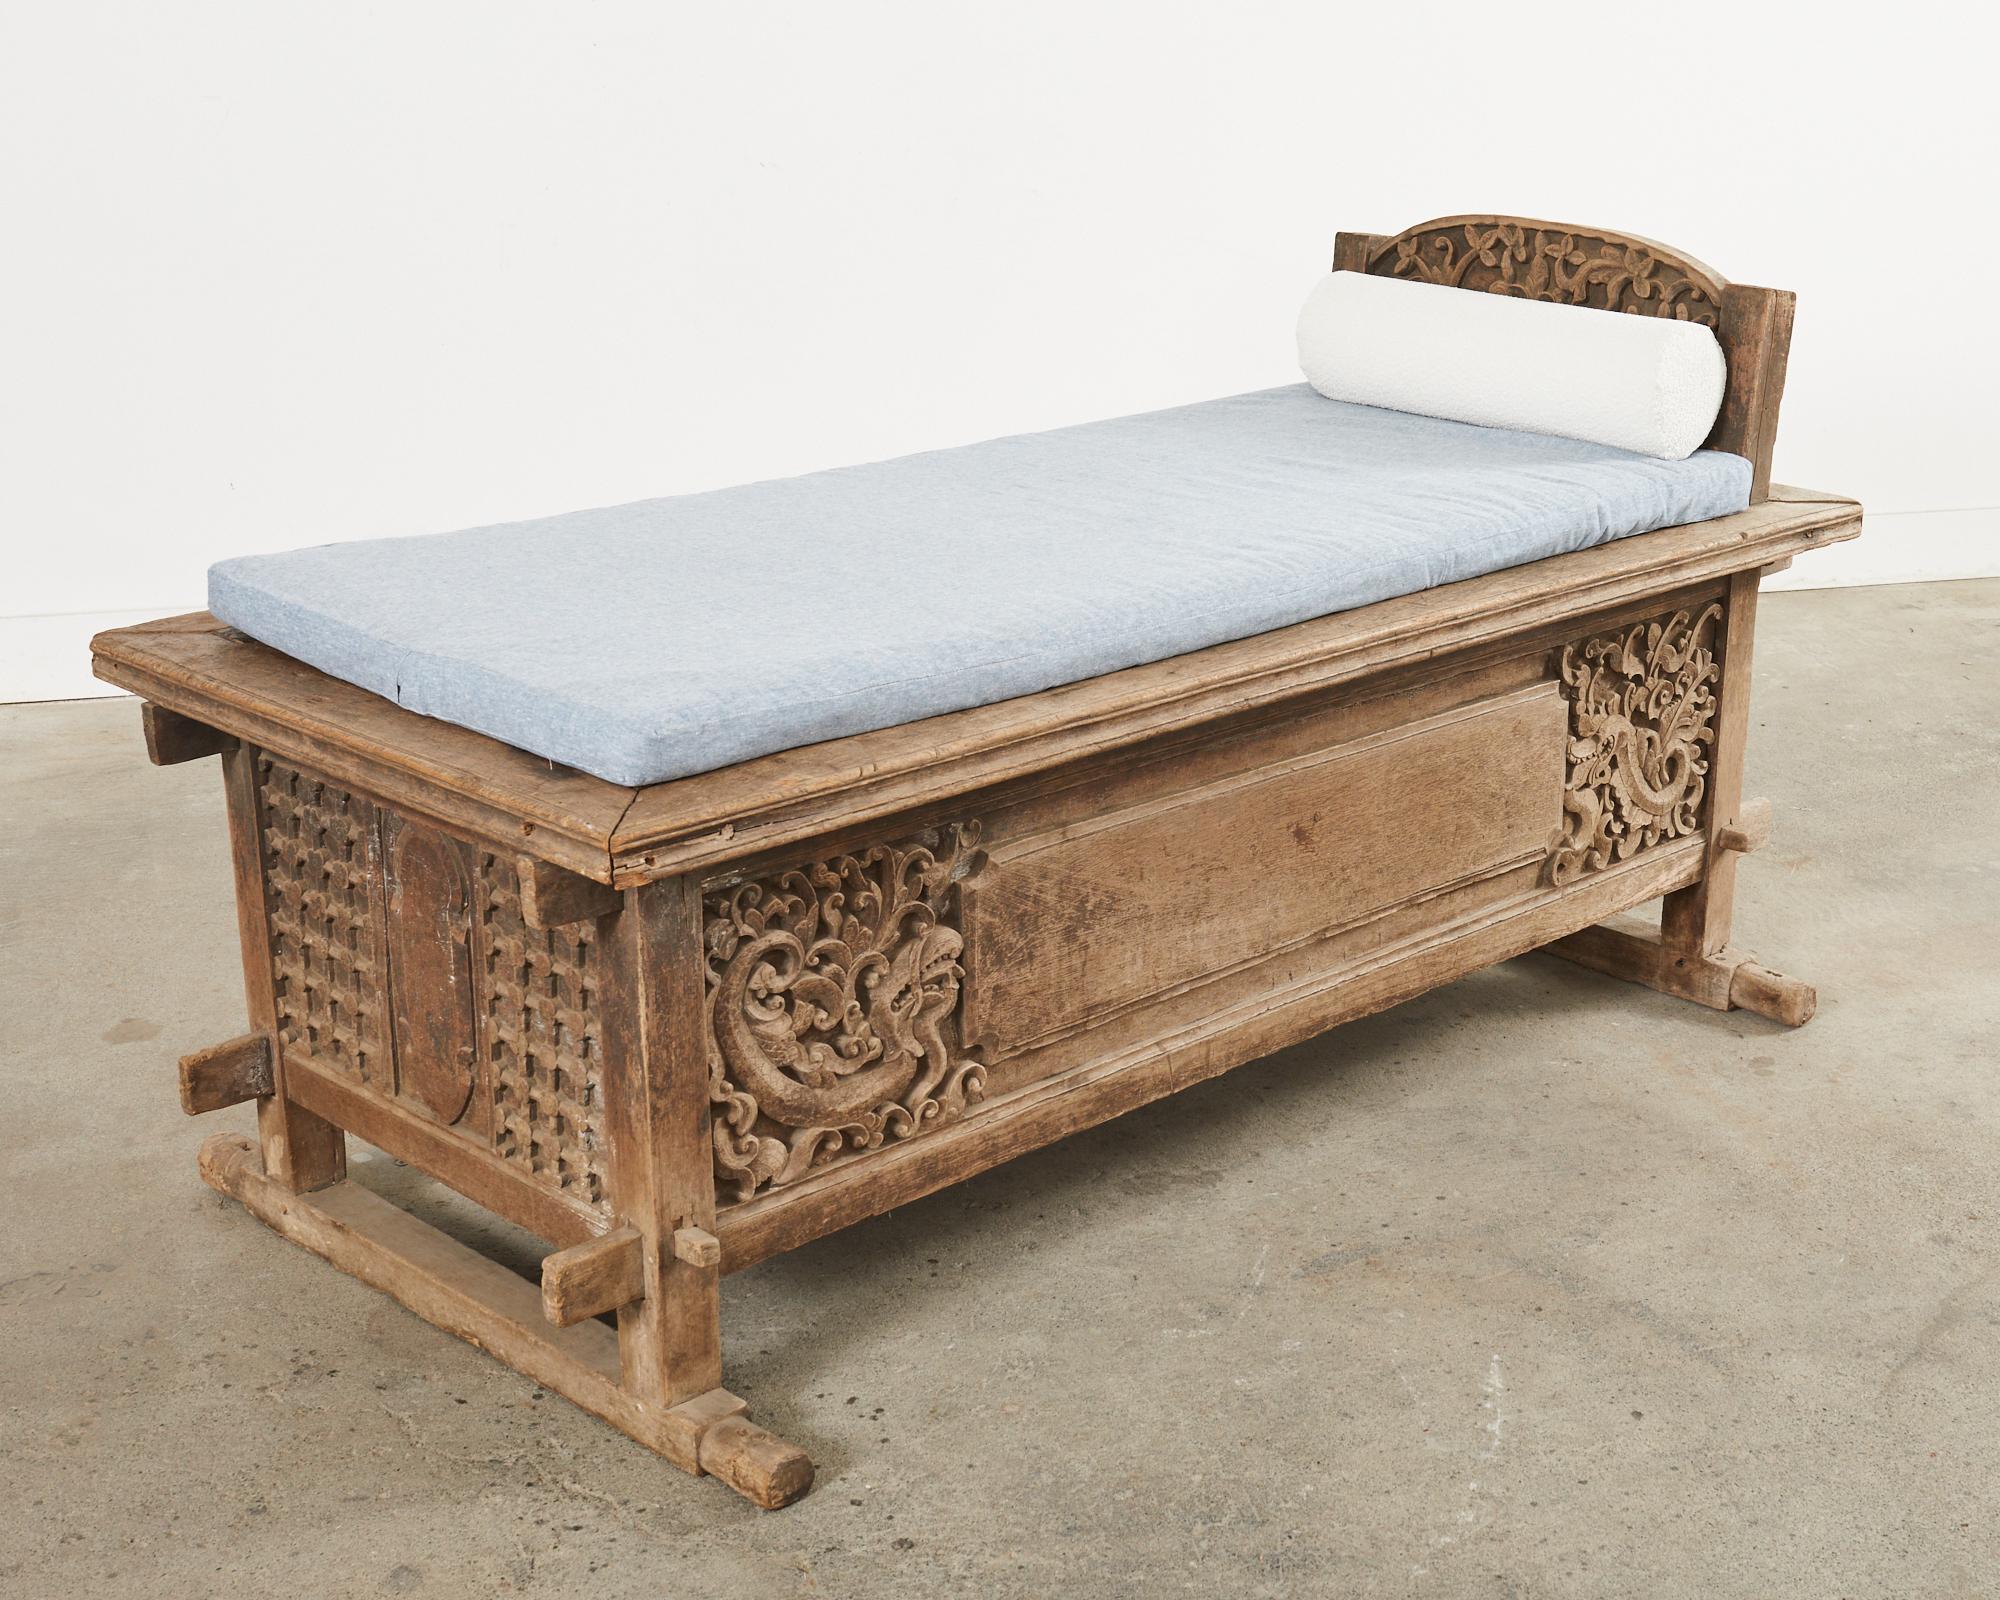 Primitive Javanese Carved Teak Indo Wedding Chest Daybed from Bali For Sale